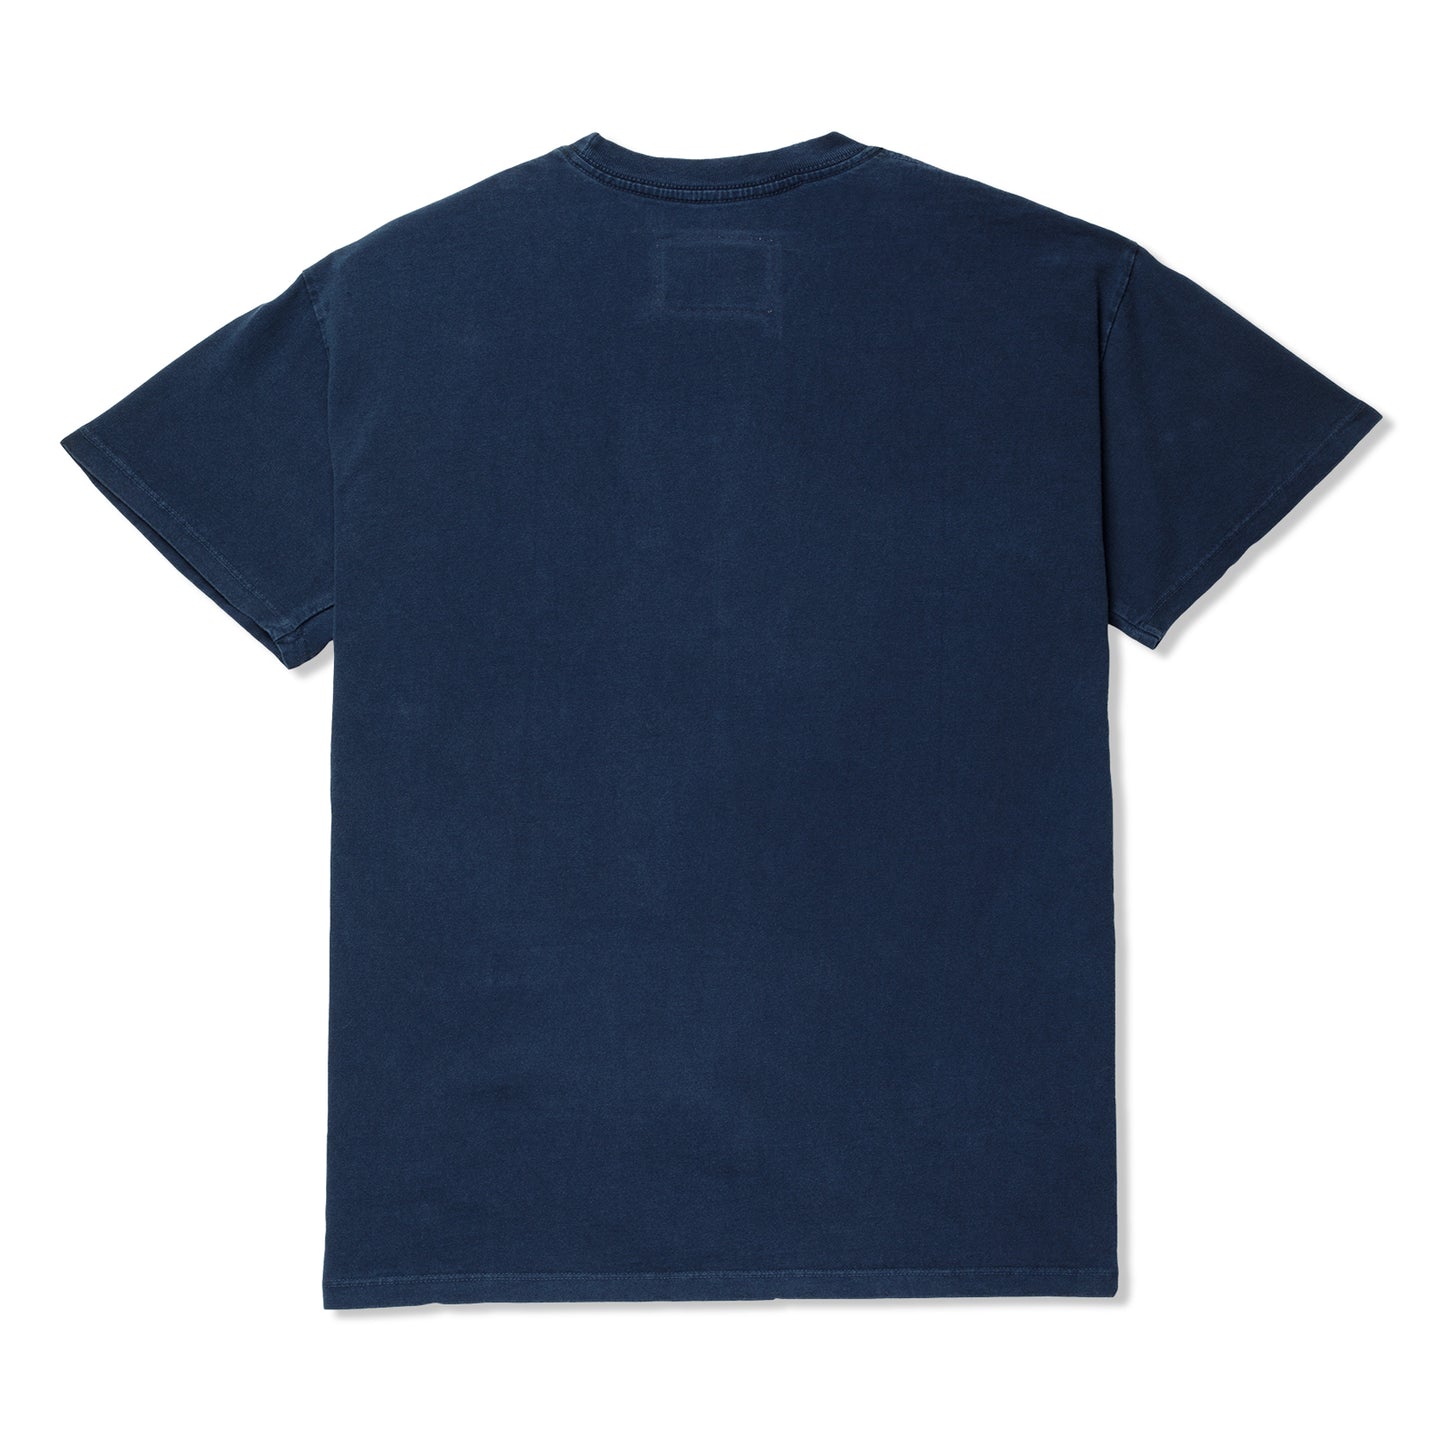 ONE OF THESE DAYS J.W. Harding Tee (Navy) – CNCPTS